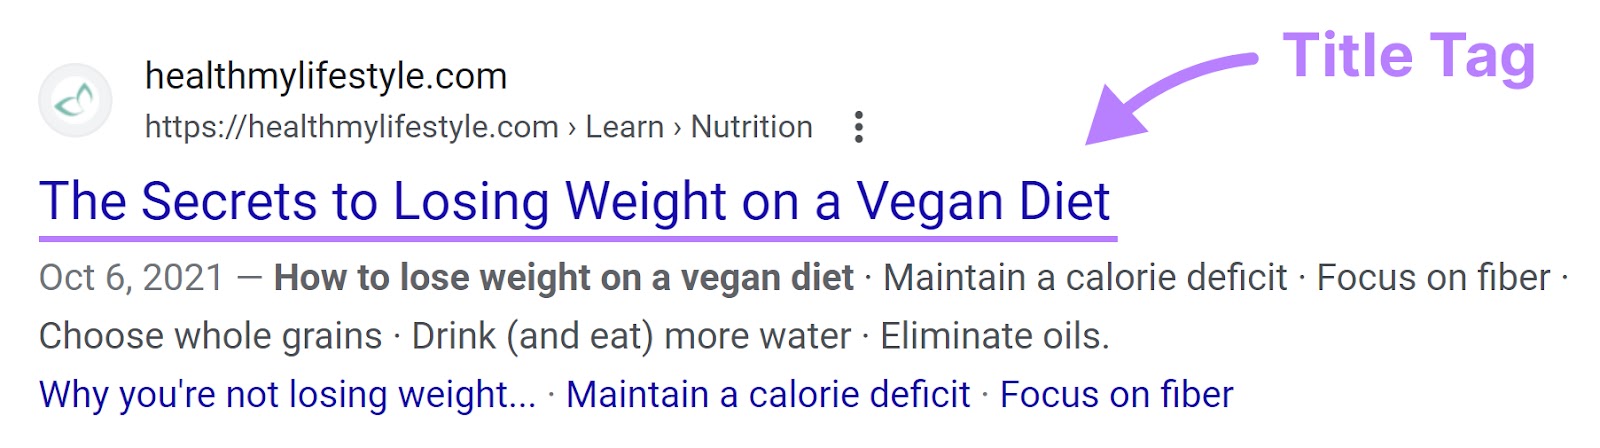 "The Secrets to Losing Weight on a Vegan Diet" title tag on Google SERP